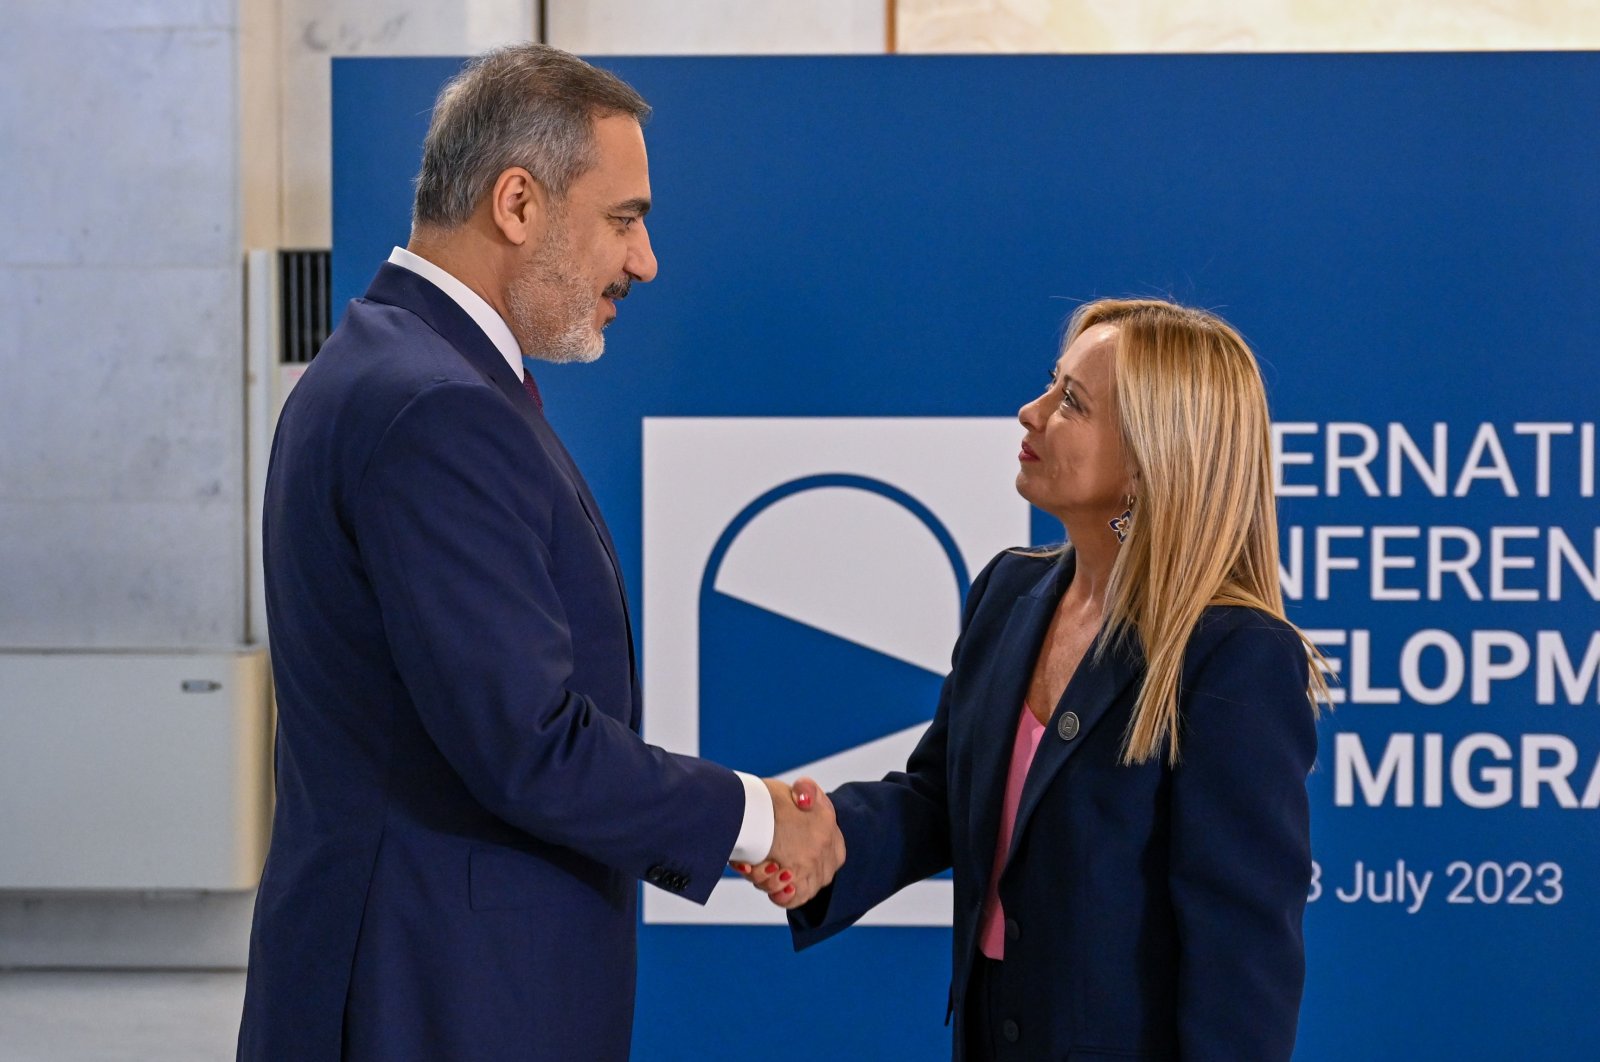 Hakan Fidan shakes hands with Italian Prime Minister Giorgia Meloni, as he arrives for a migration summit, in Rome, Italy, July 23, 2023. (AA Photo)